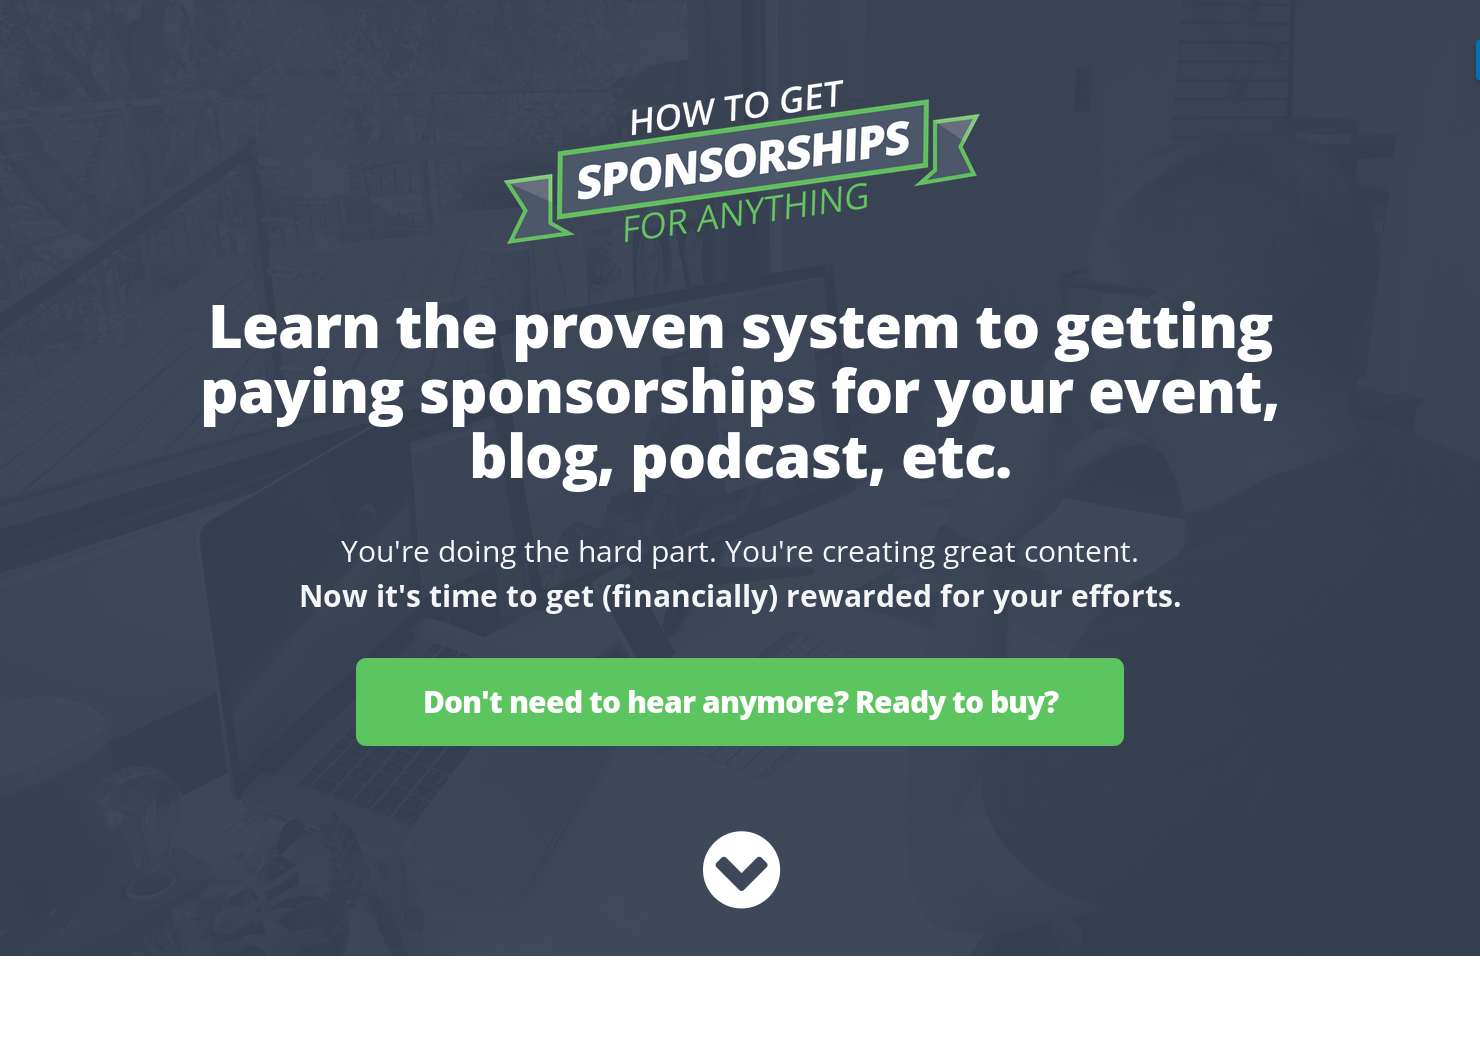 How To Get Sponsorships